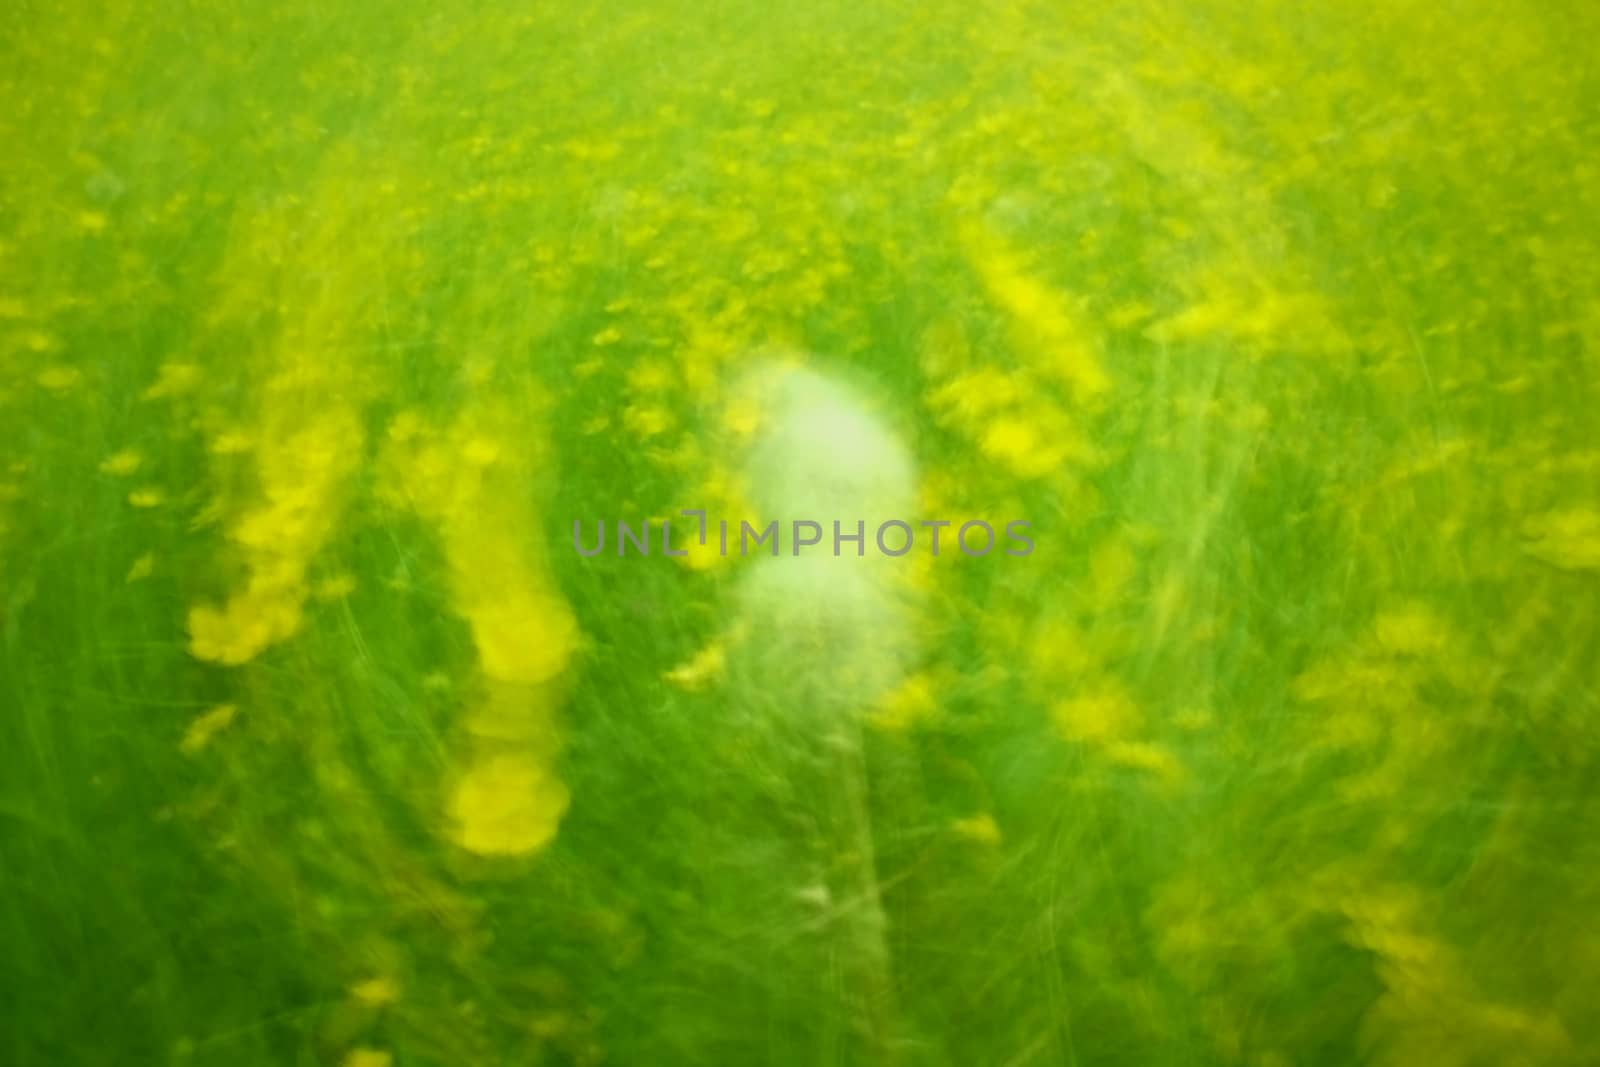 Defocused flowers and grass in circle background. Blurred and de focused yellow blossom and green grass stalks. Hypnotic blurry effect.